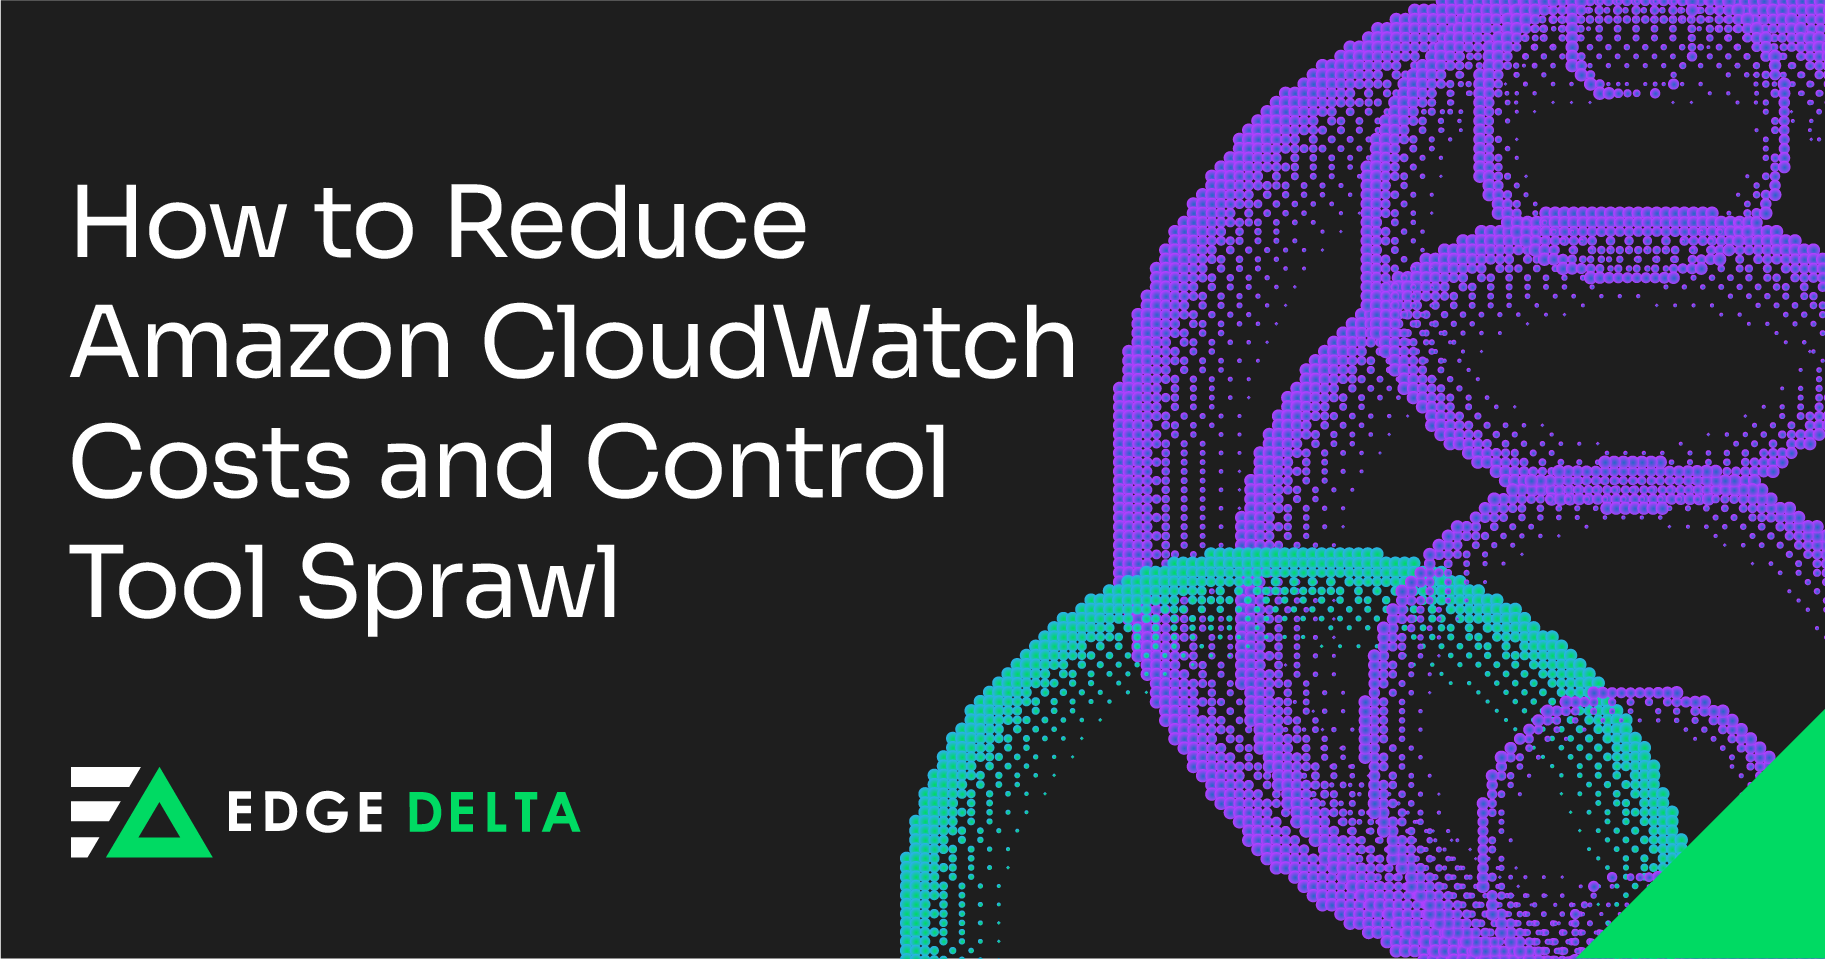 How to Reduce Amazon CloudWatch Costs and Control Tool Sprawl